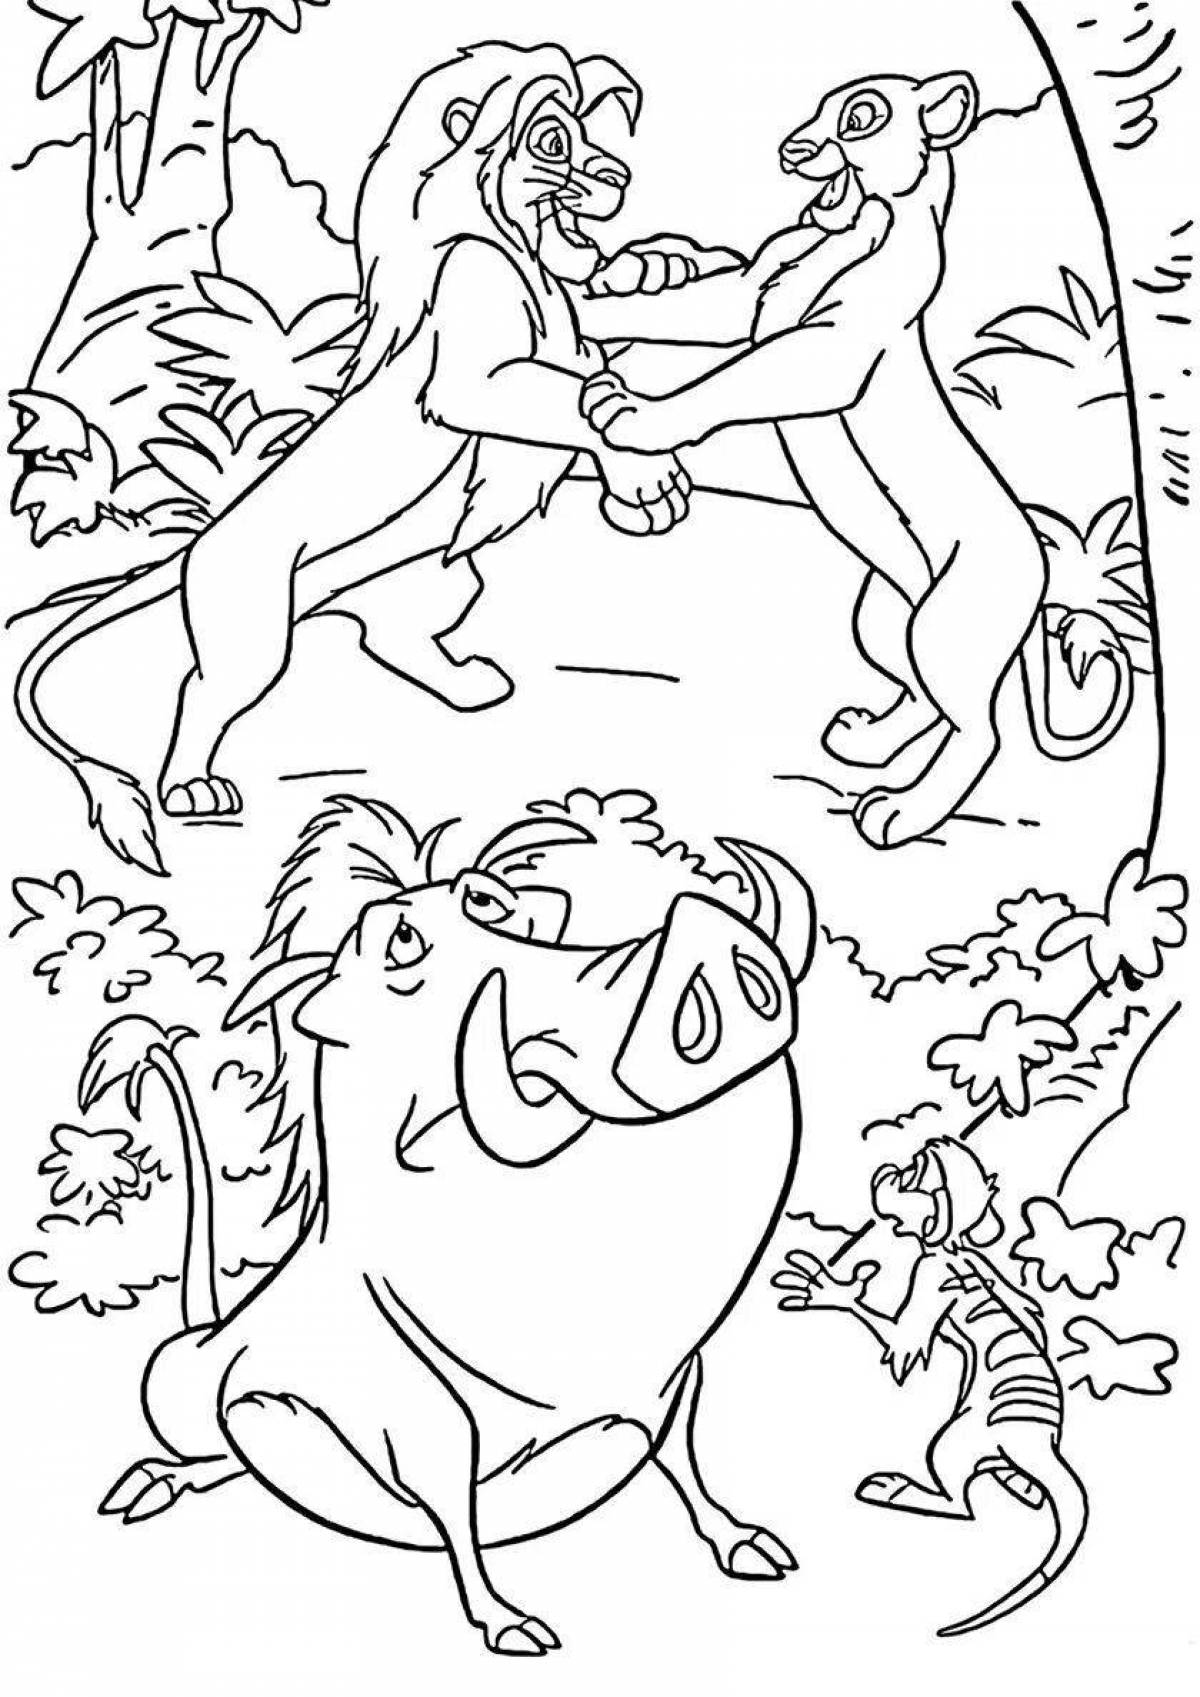 Joyful lion king coloring pages for kids